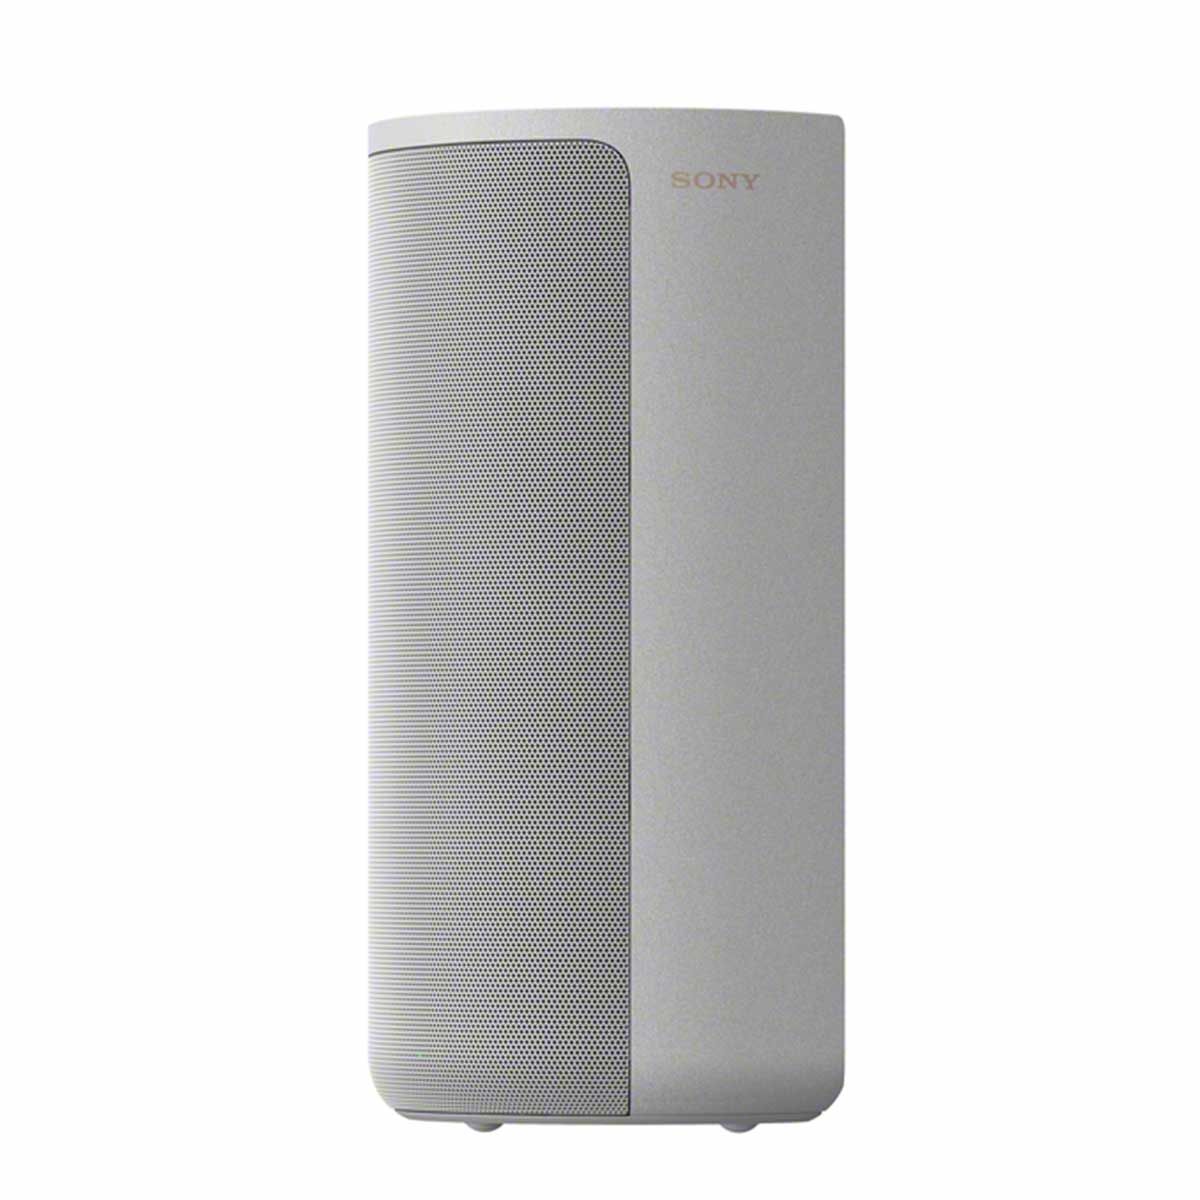 Sony HT-A9 High-Performance Wireless Speaker System, individual speaker side view